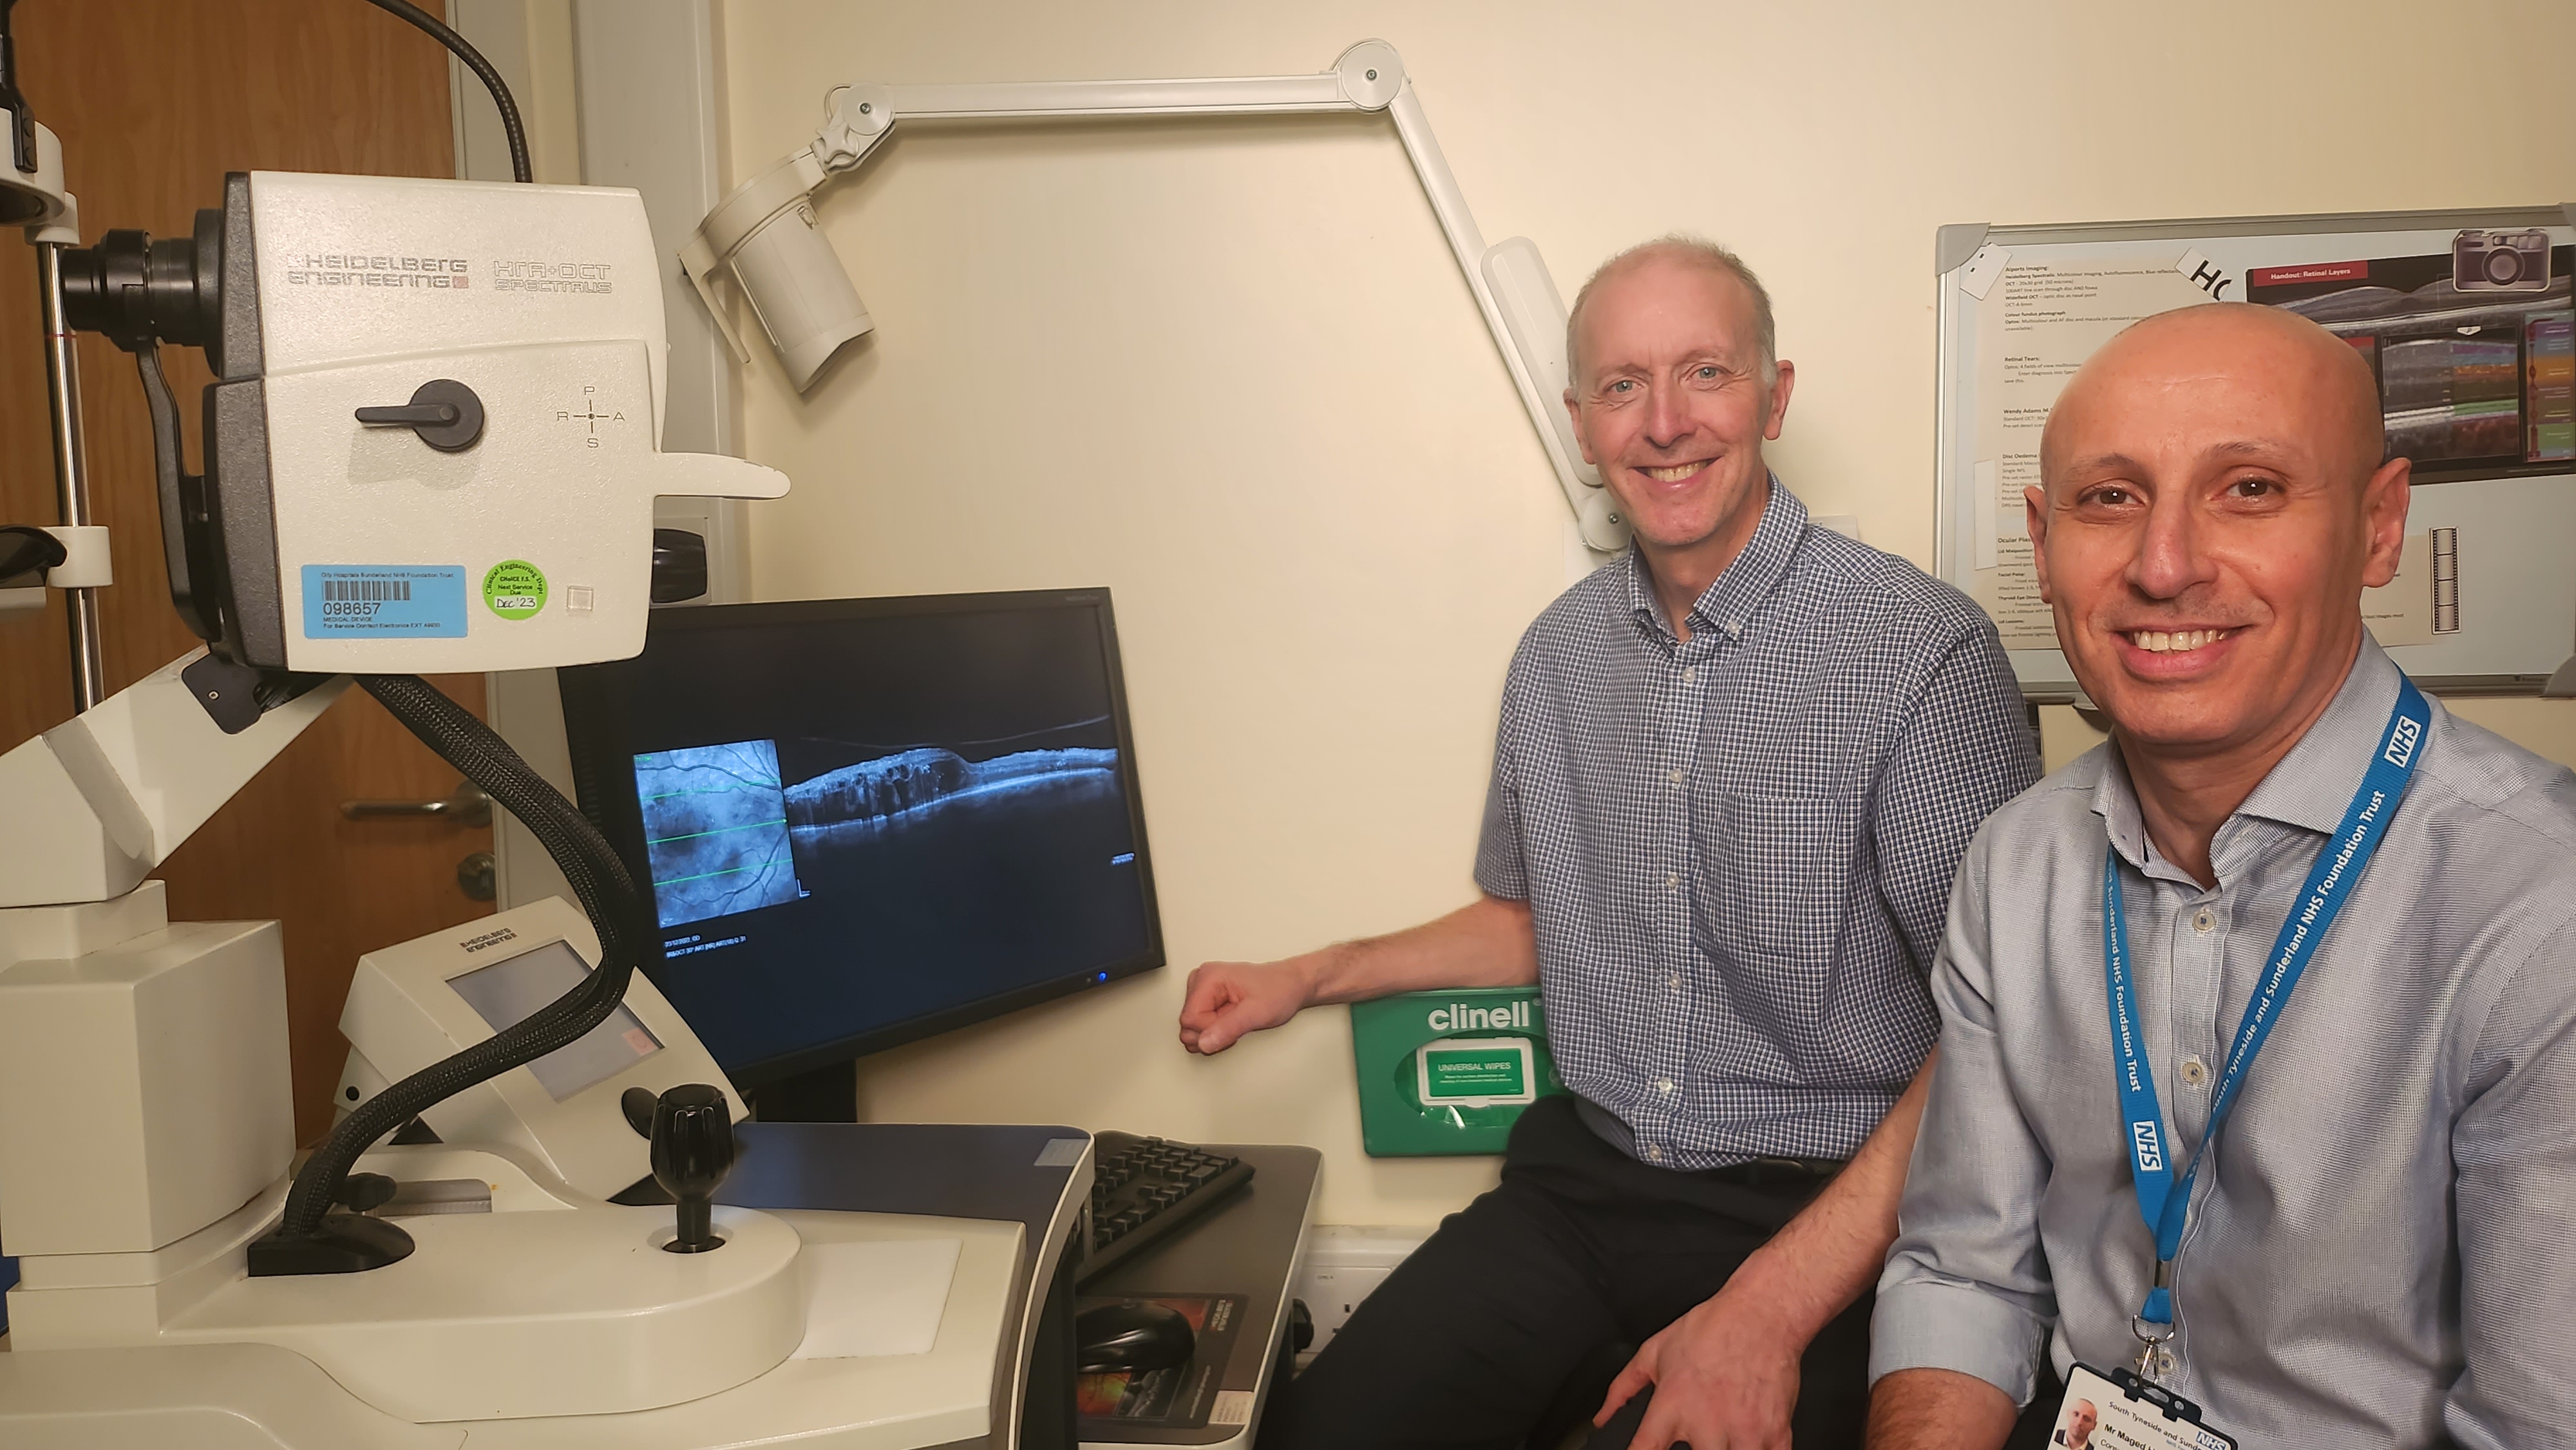 Professor David Steel and Mr Maged Habib review an image of a patient's eye as part of their research work into DMO..jpg